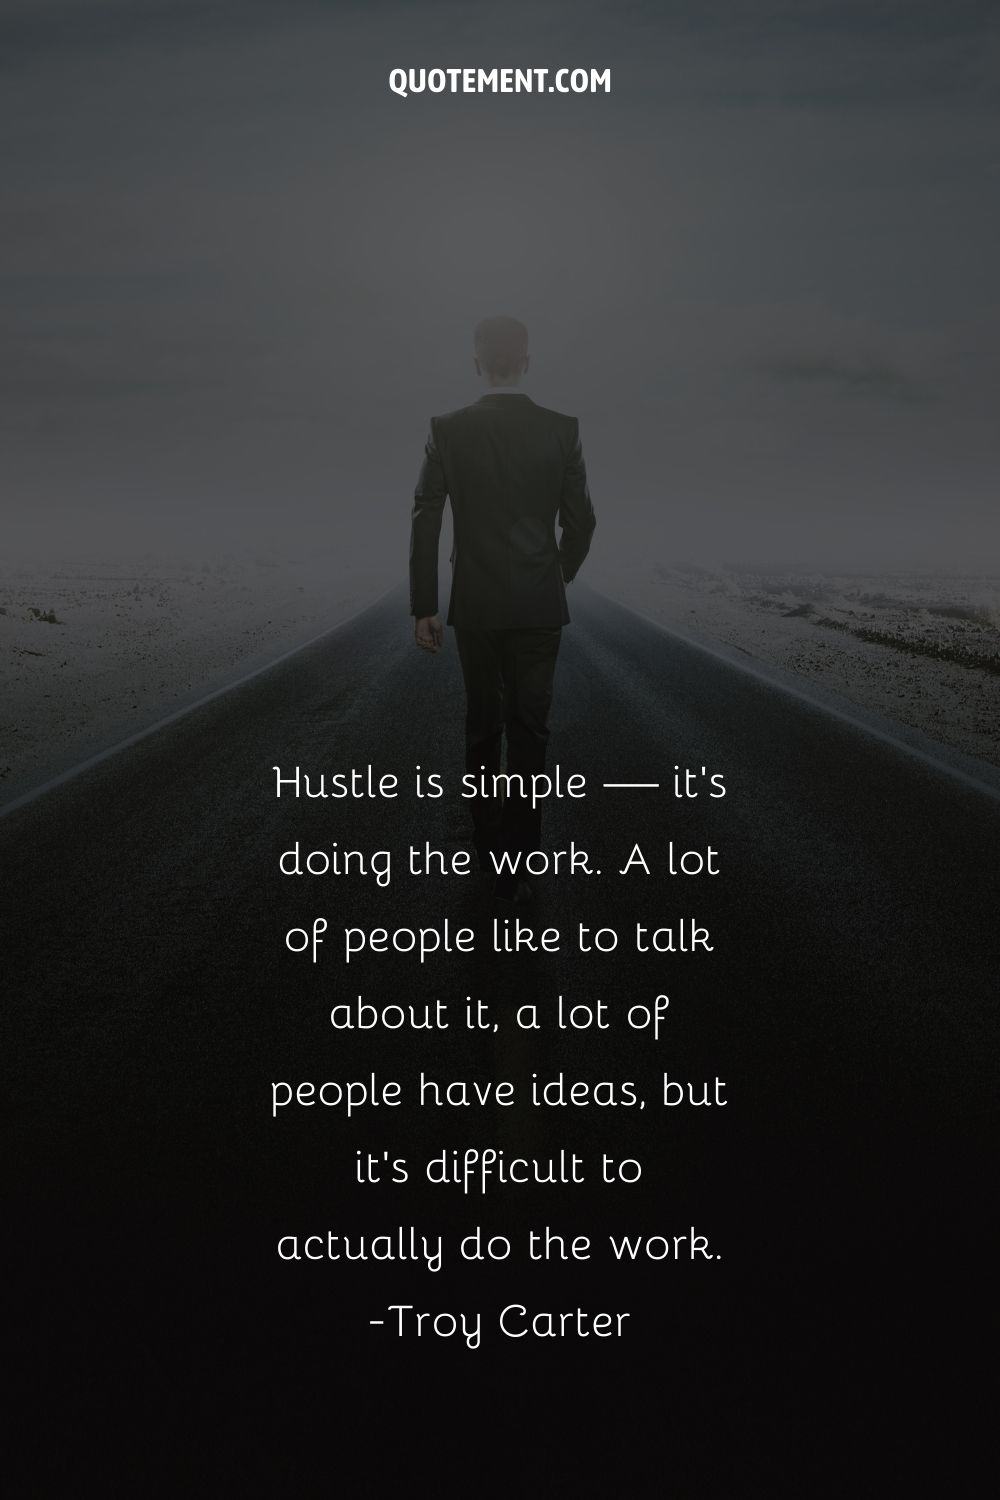 Hustle is simple — it’s doing the work